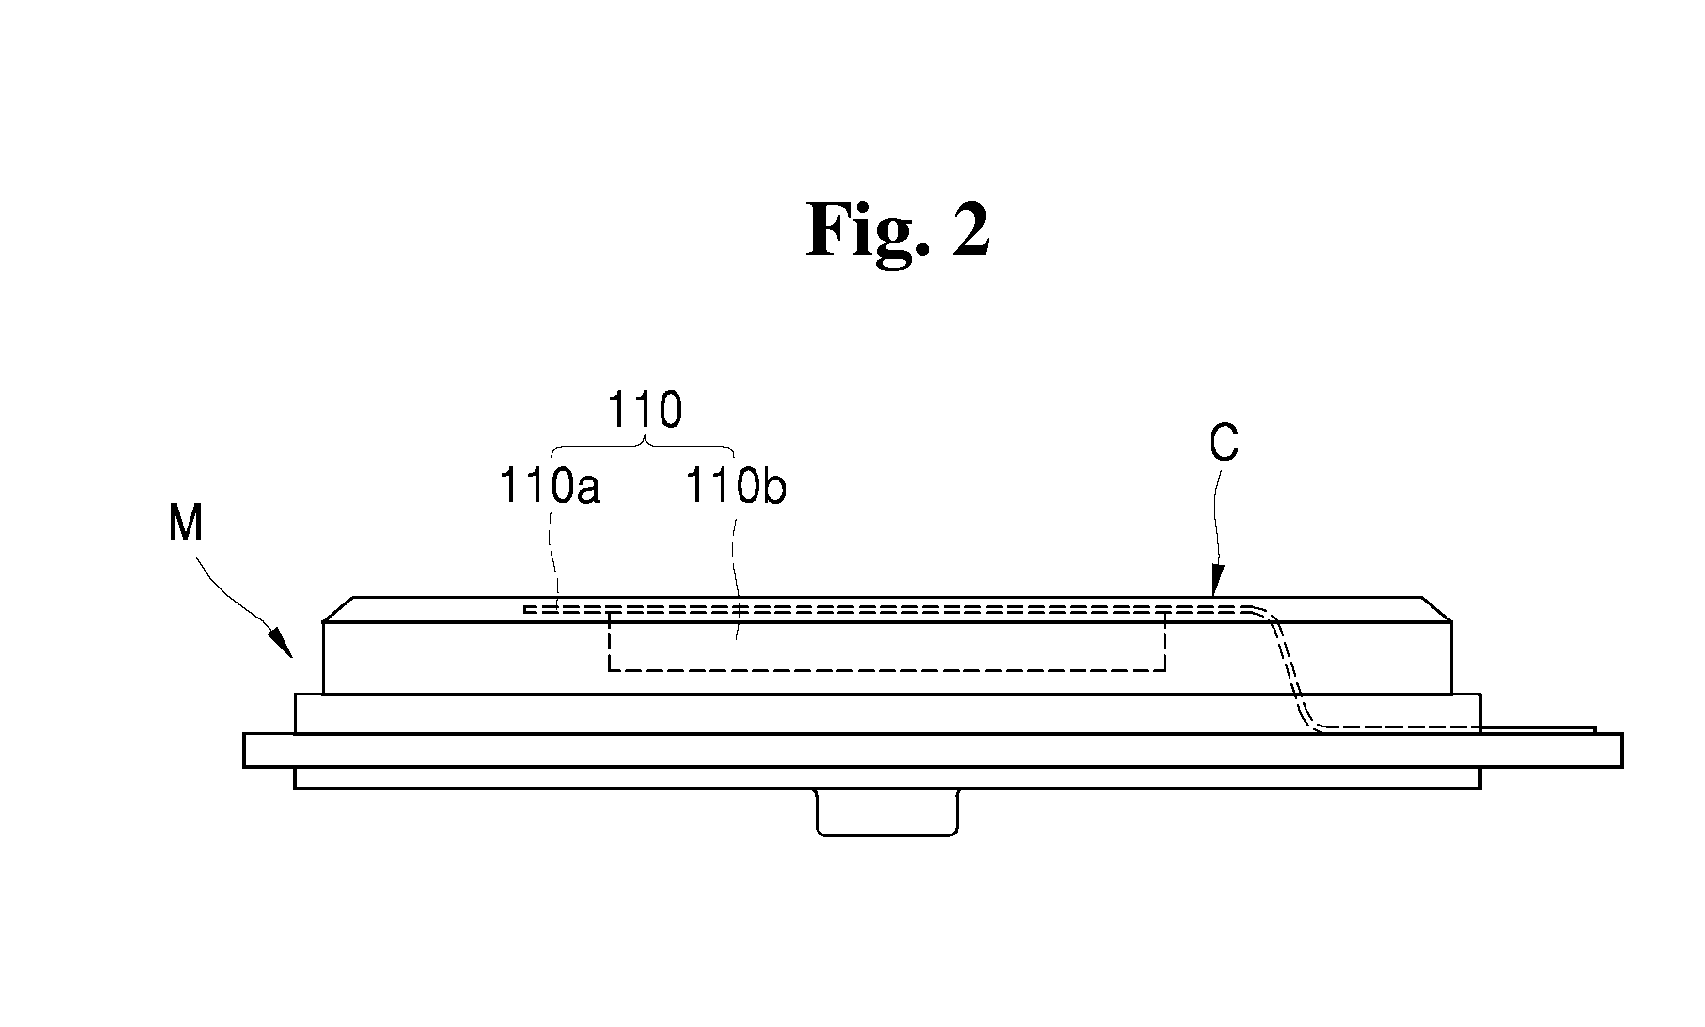 Method of manufacturing fingerprint recognition home key for improving attachment precision of fingerprint recognition sensor